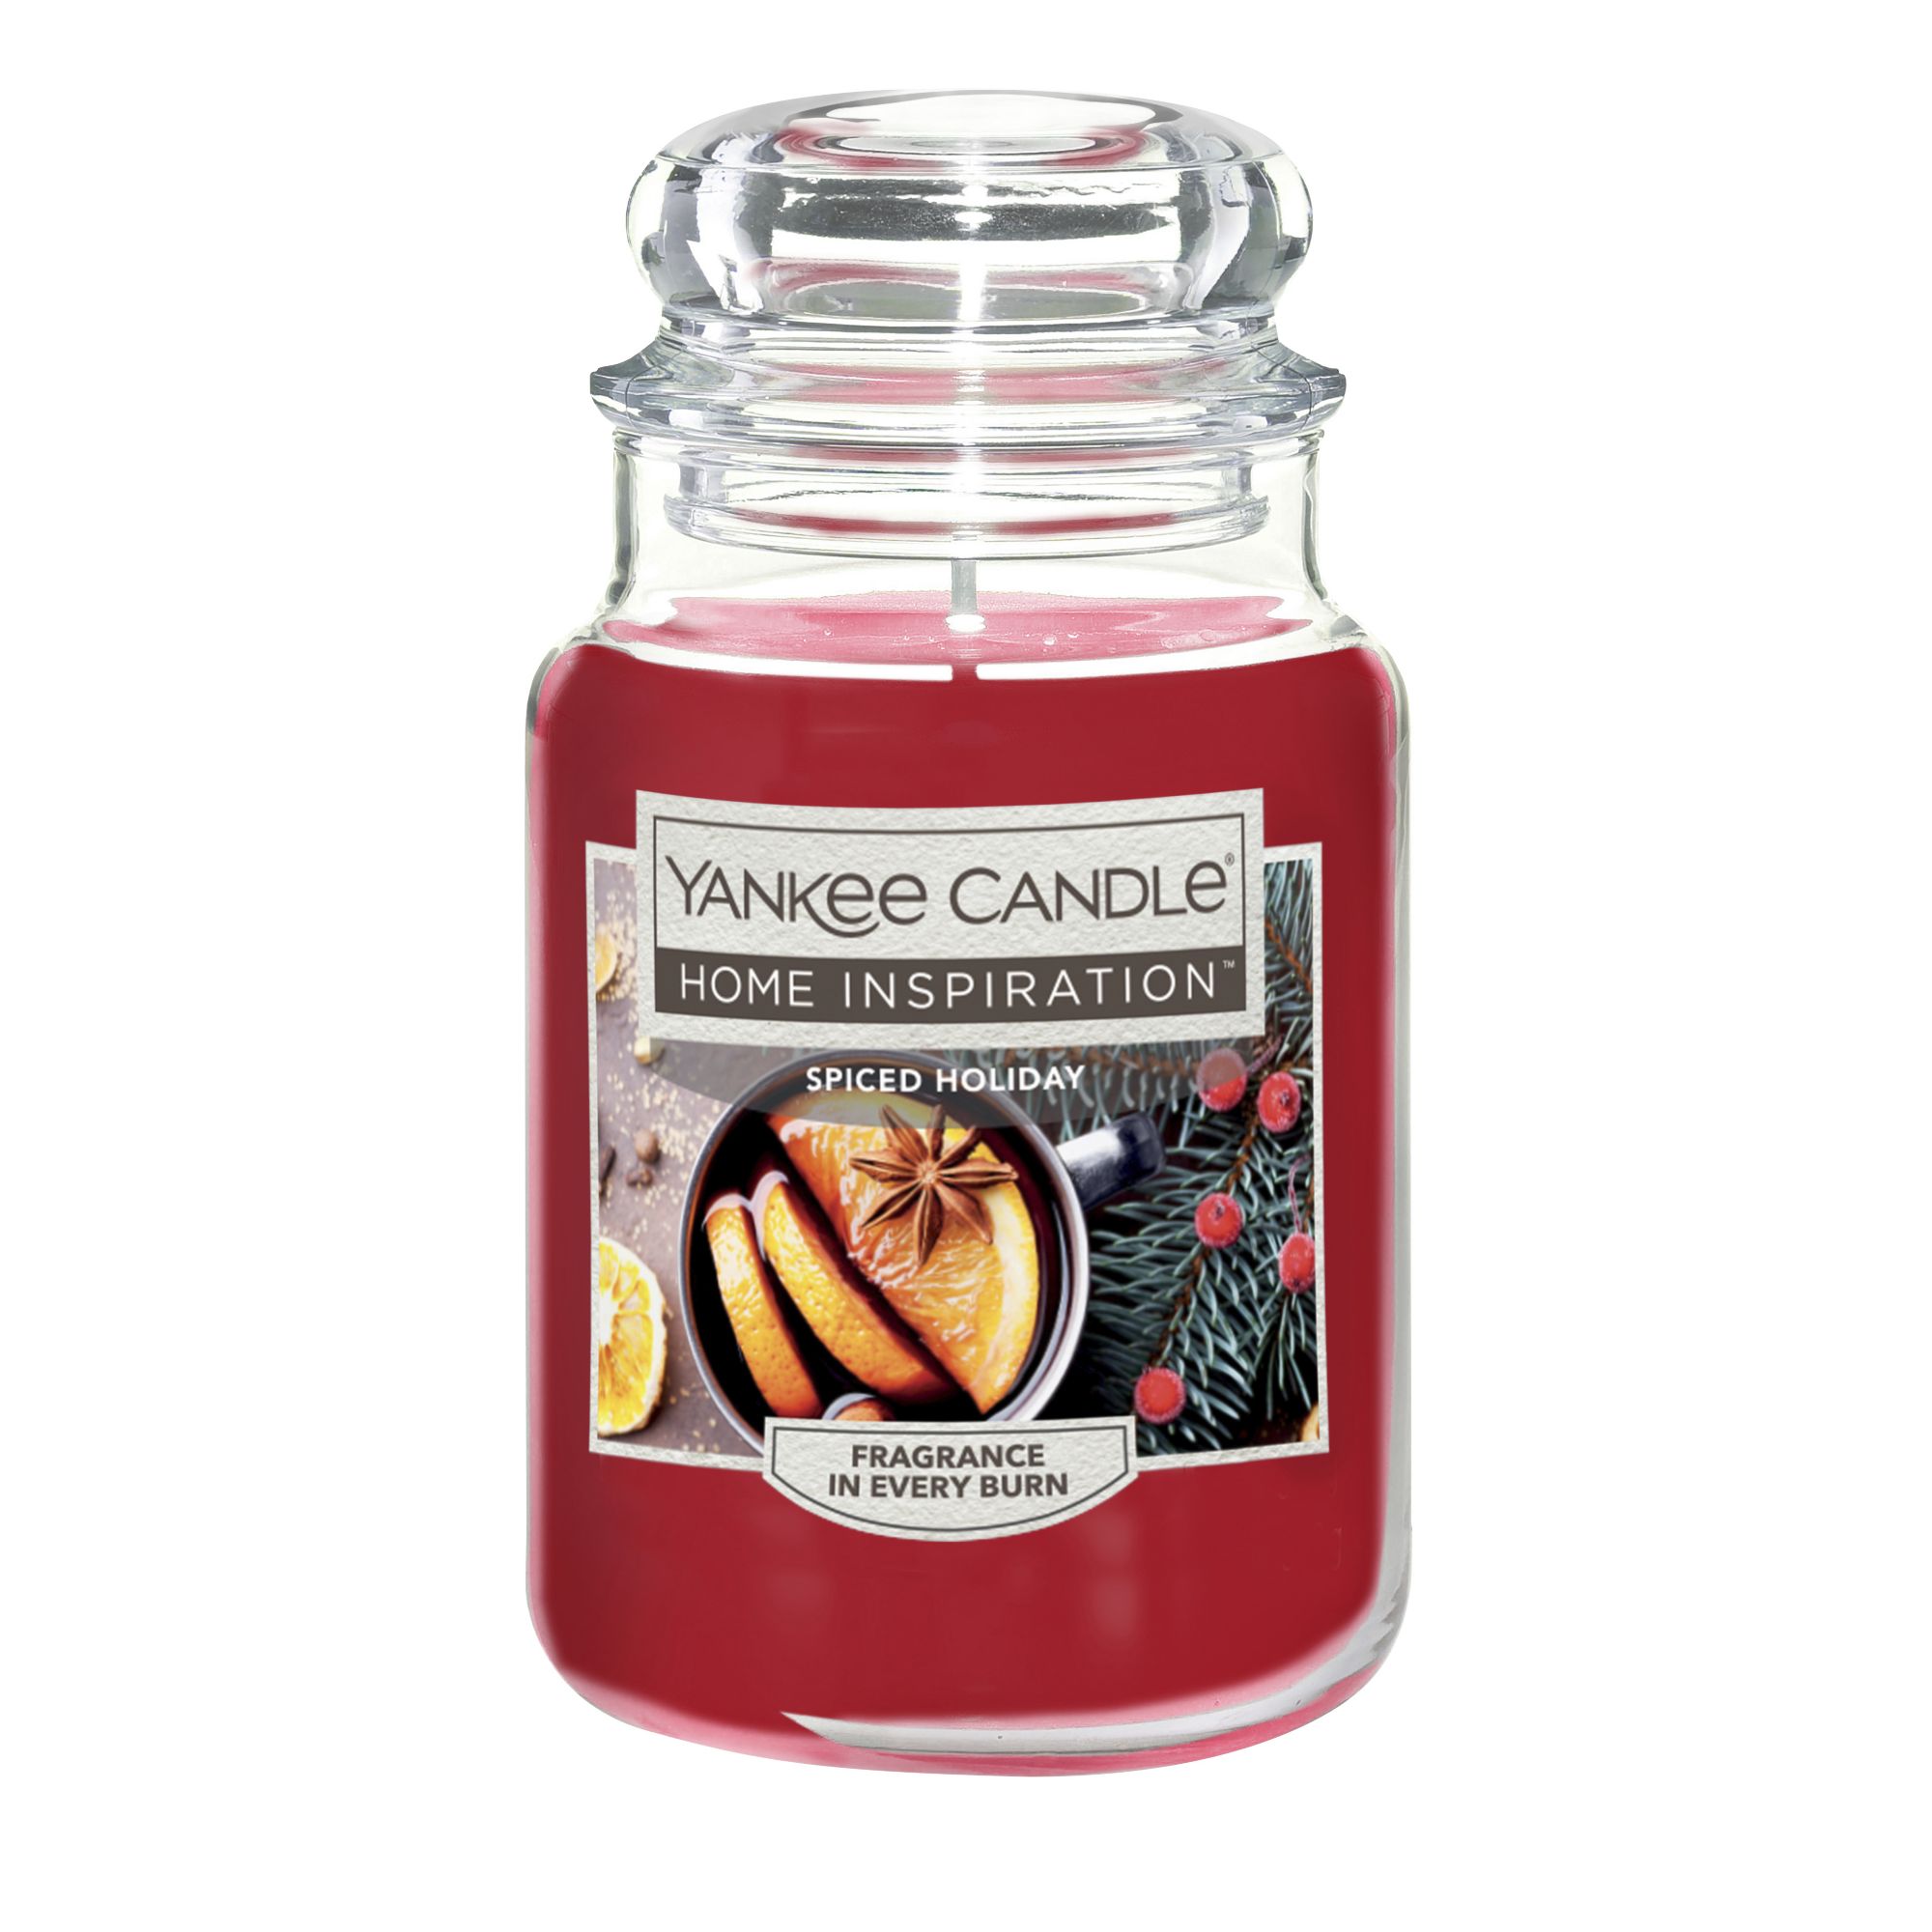 Holiday deals 2019: Get huge savings at Yankee Candle right now